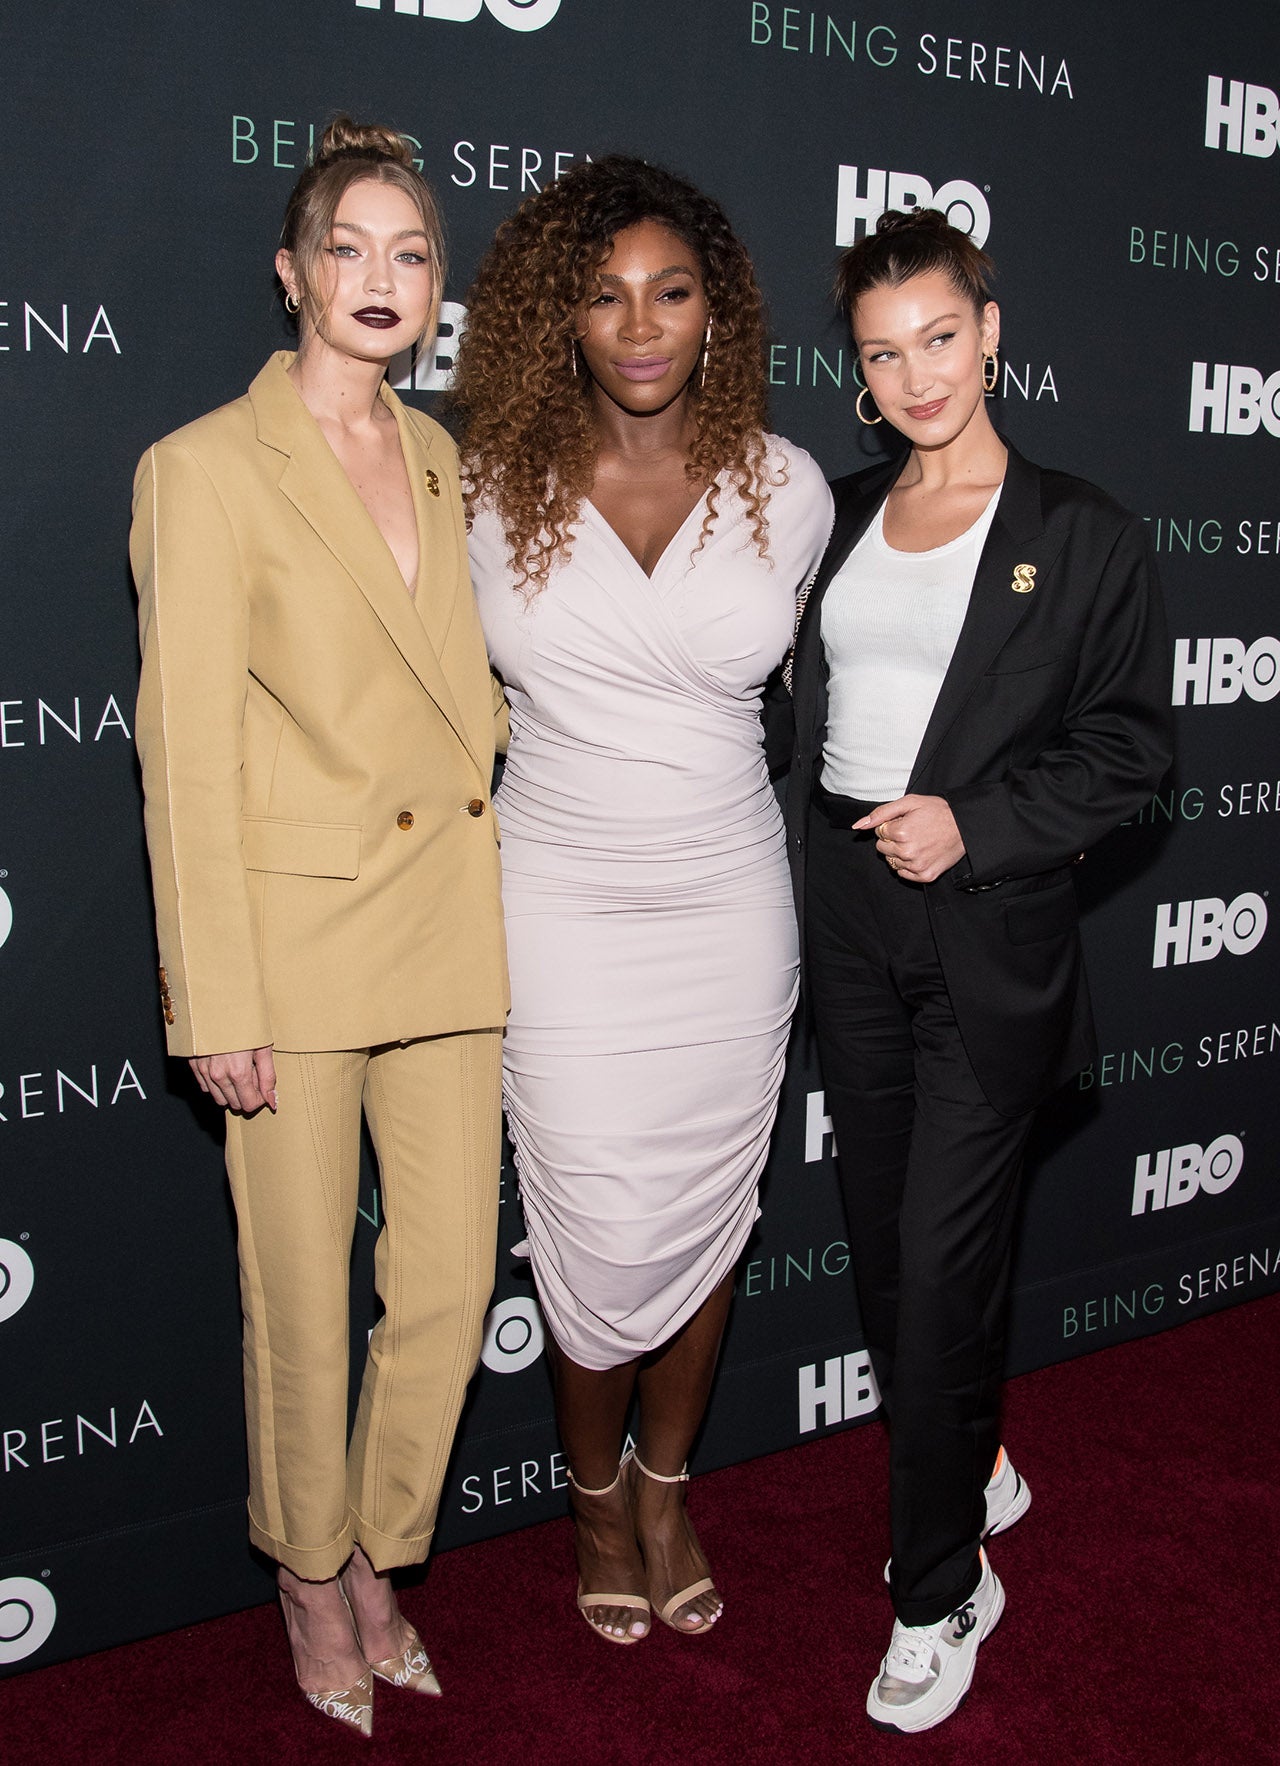 Gigi and Bella Hadid Suit Up in Coordinating Styles for Serena Williams Documentary Premiere Entertainment Tonight